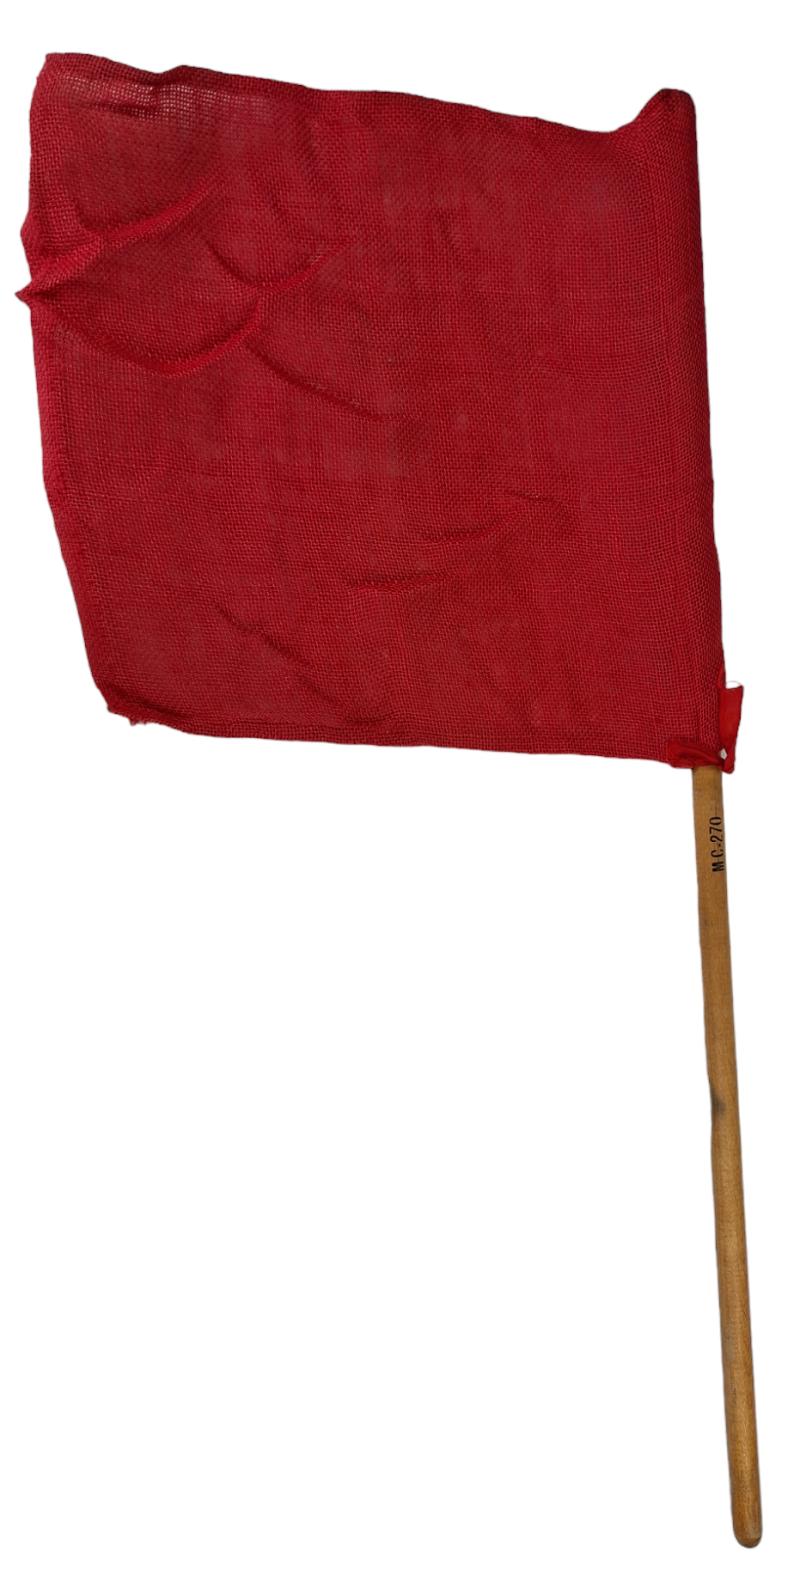 A us ww2 traffic controller flags bag with flags